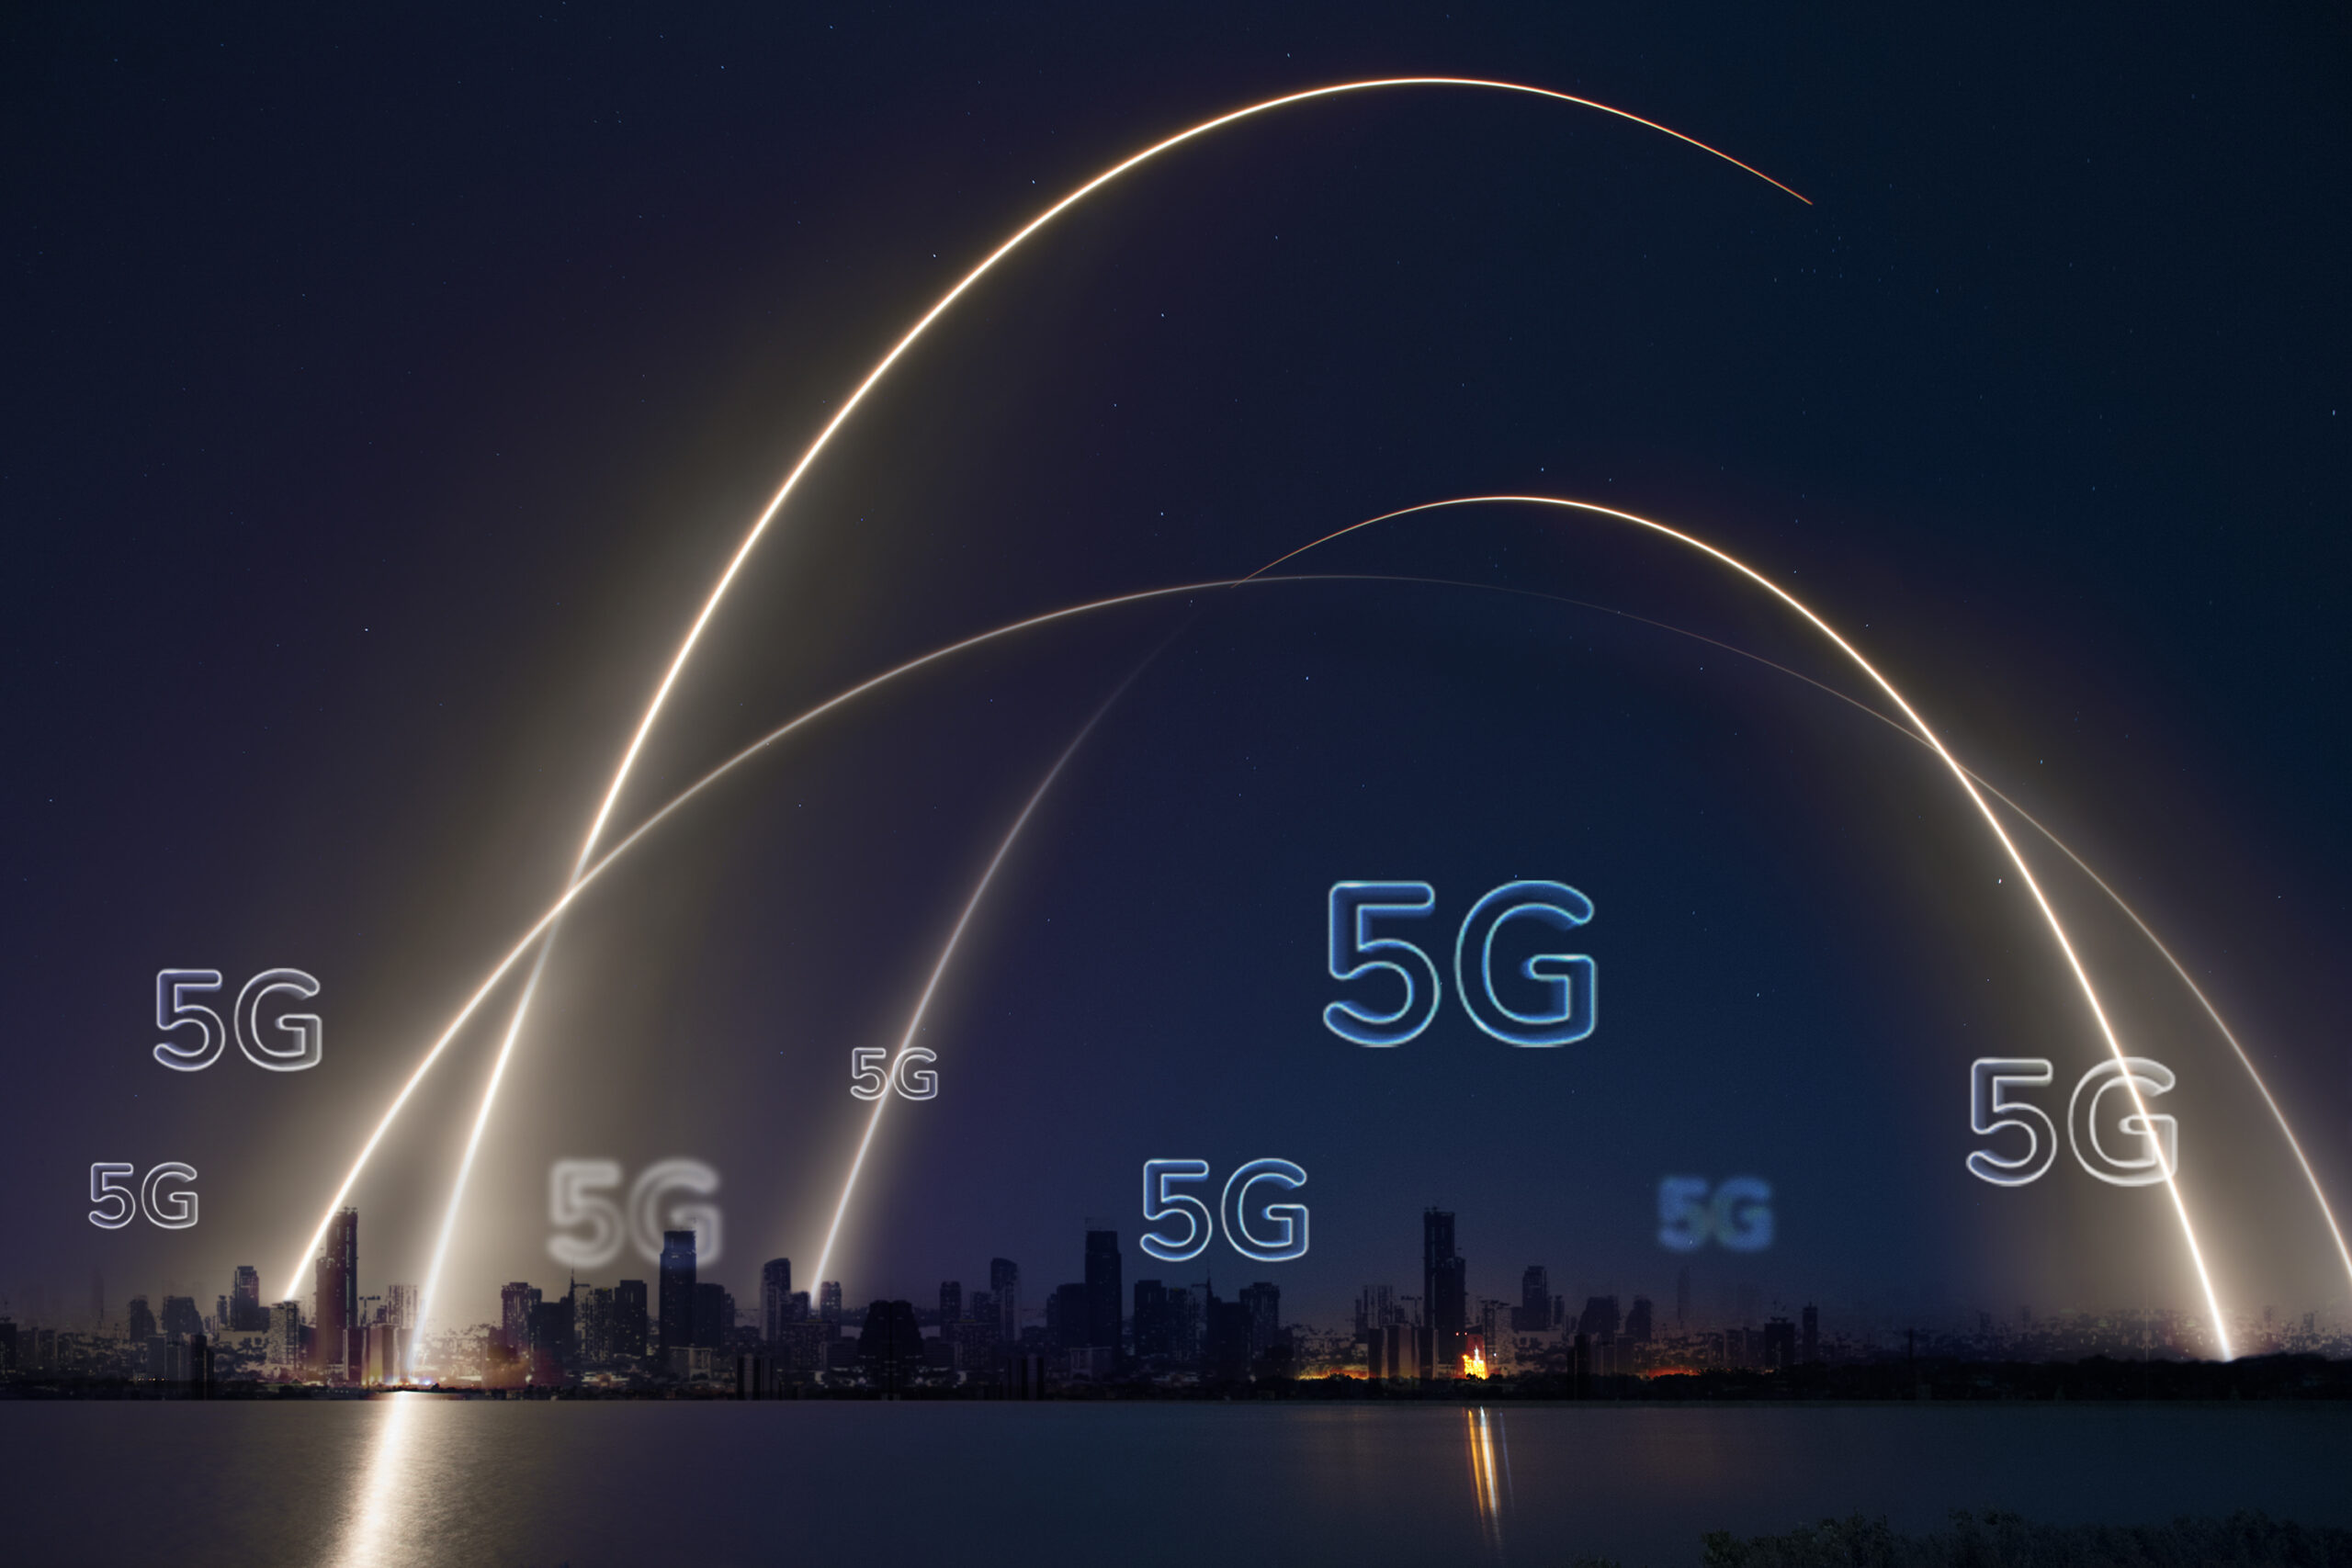 Read more about the article ESCALATING THE IOT (INTERNET OF THINGS) WITH 5G NETWORK TECHNOLOGIES.